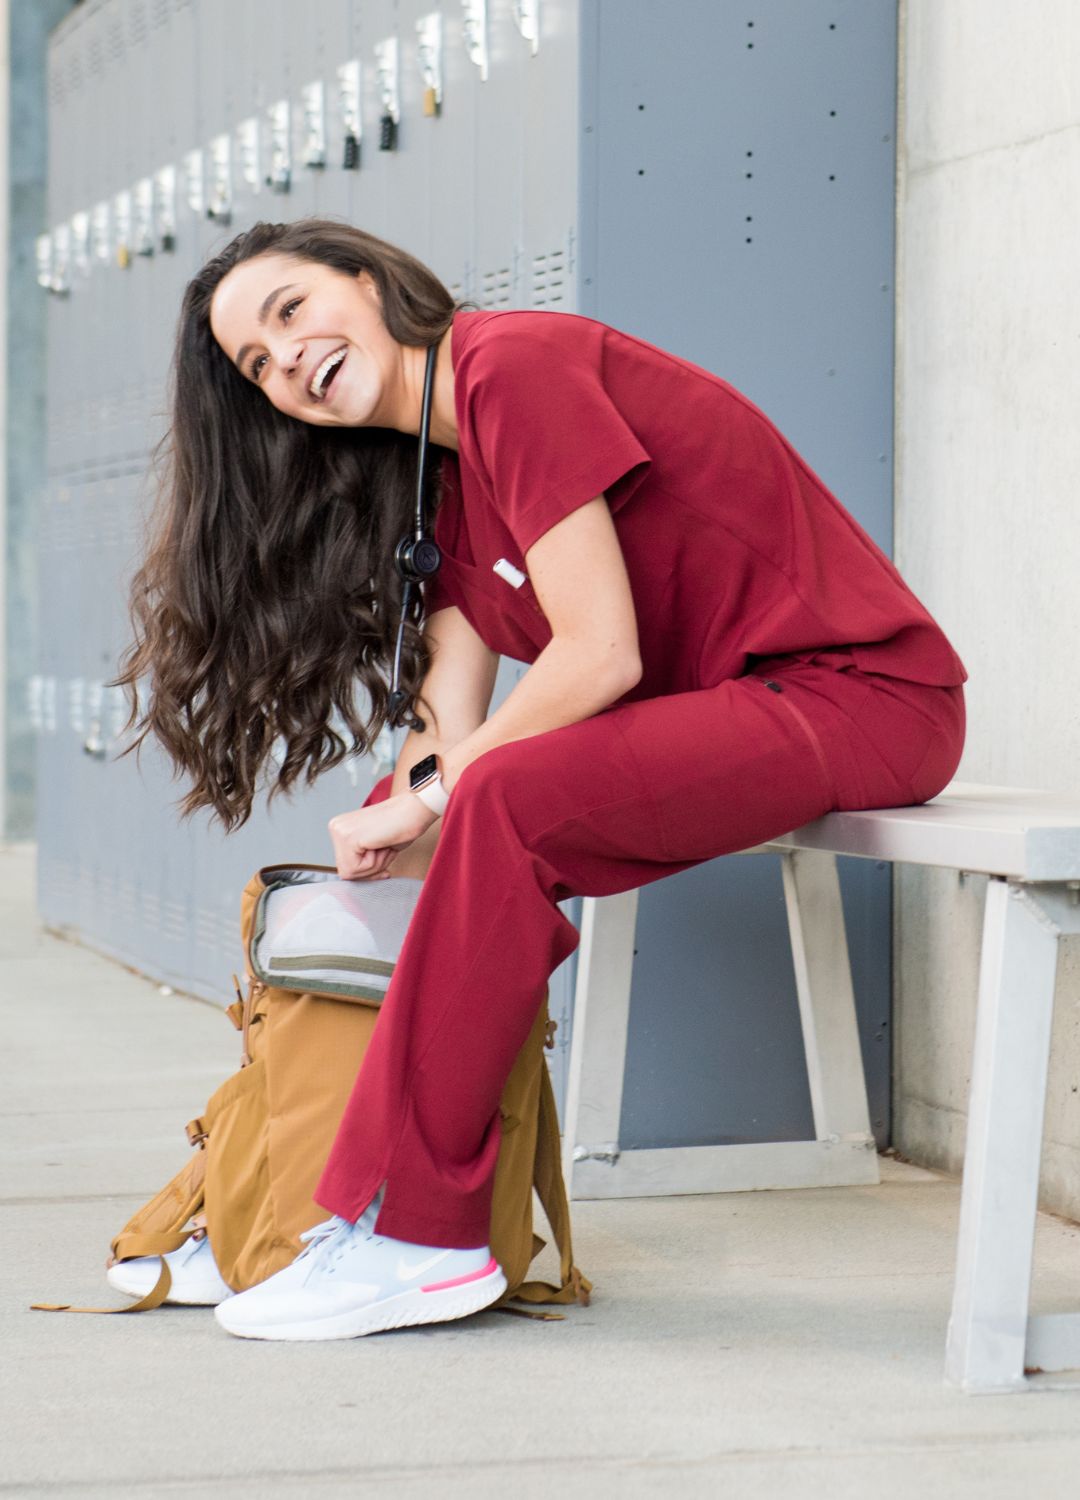 Women's burgundy red scrubs seated on bench.